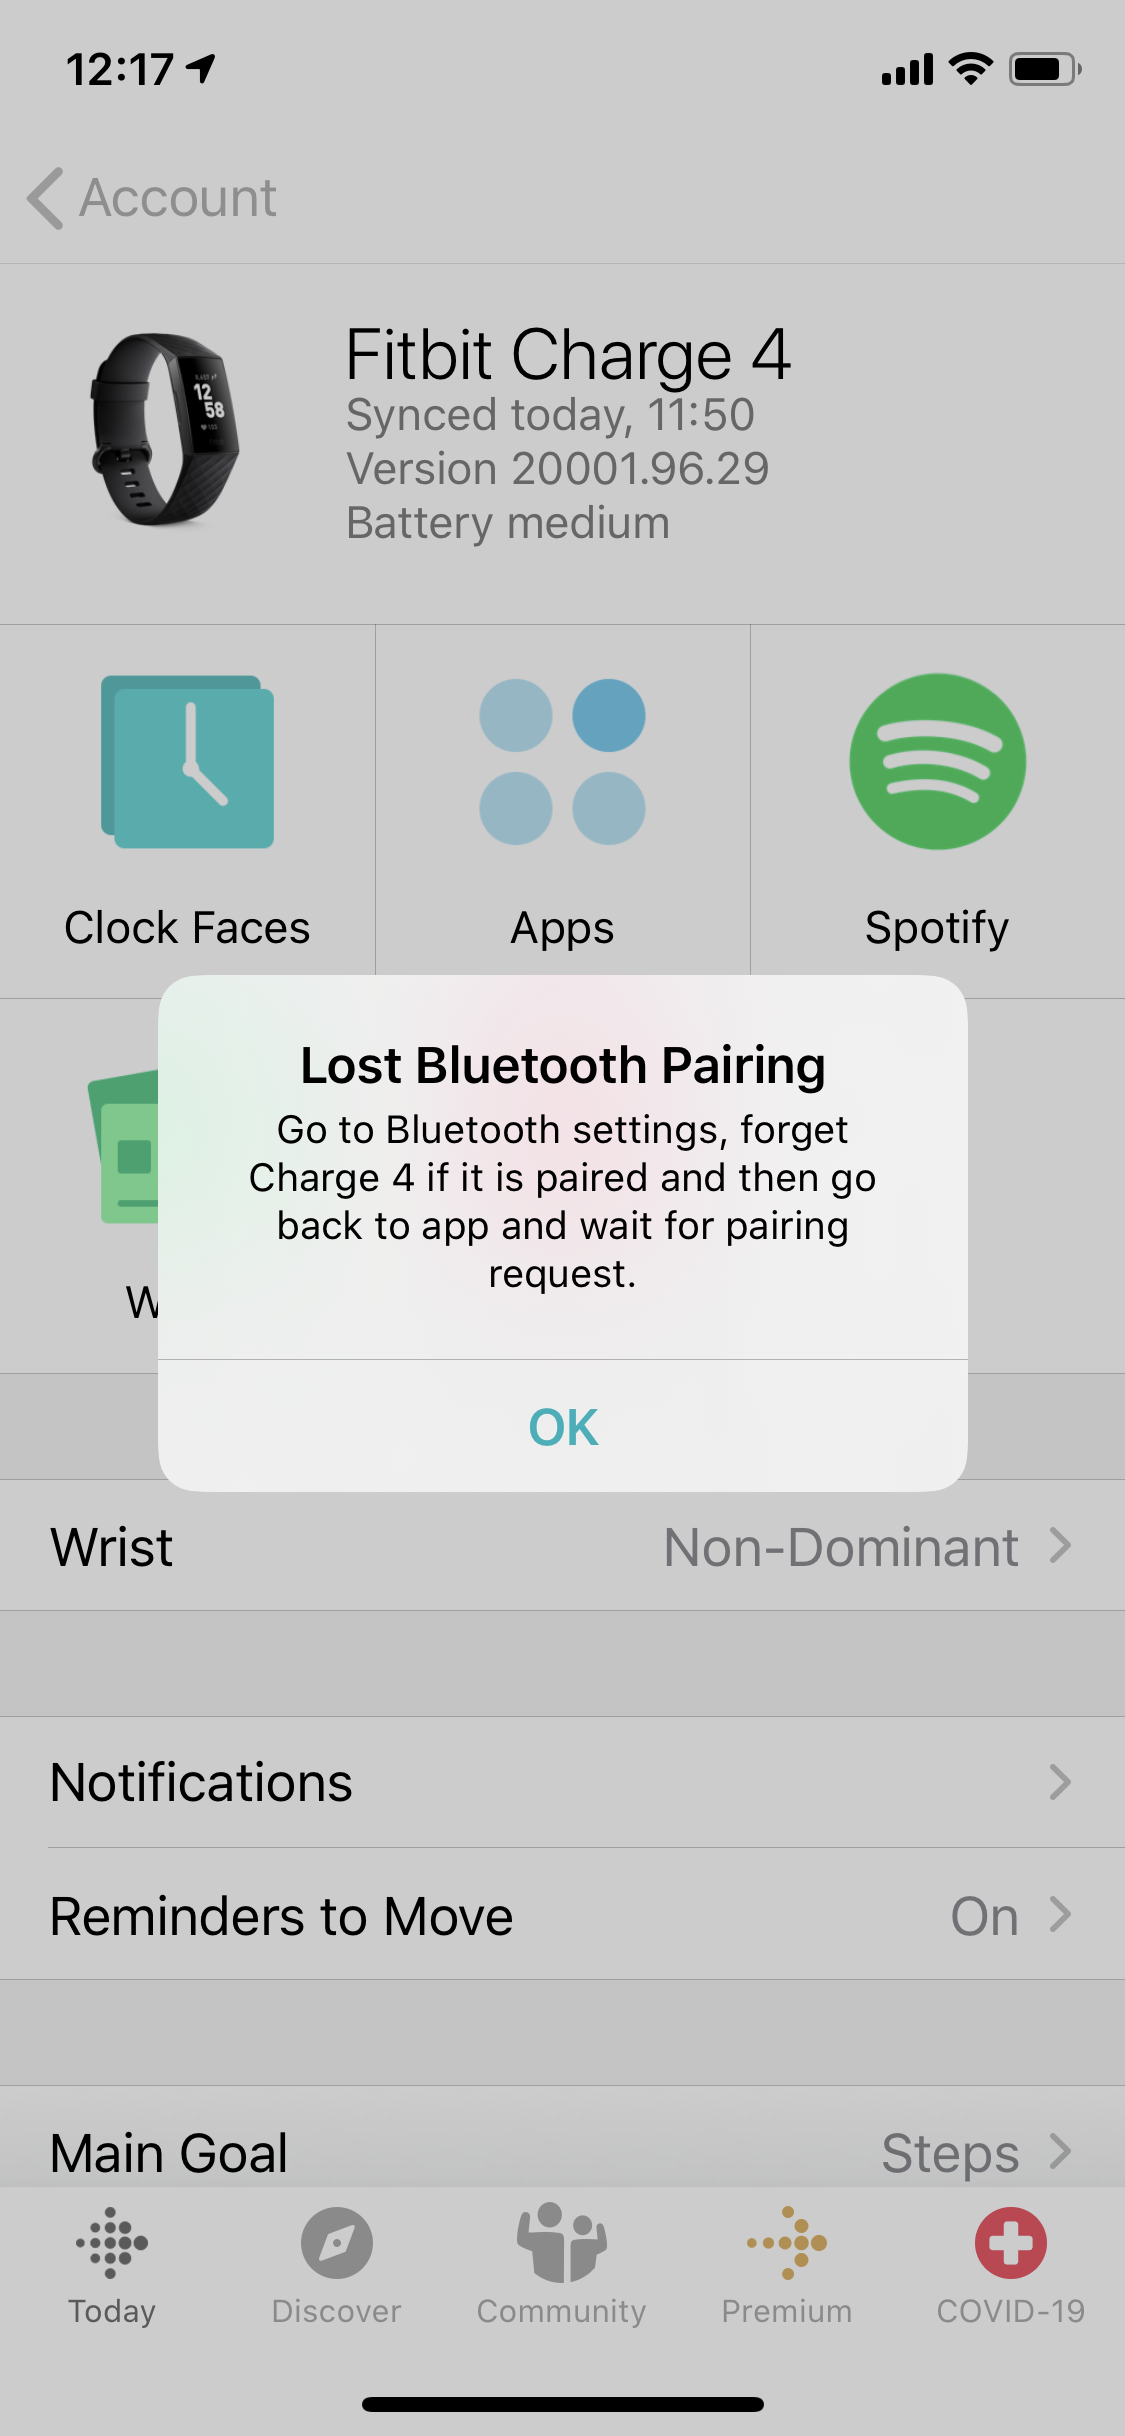 how to sync fitbit charge 4 with iphone